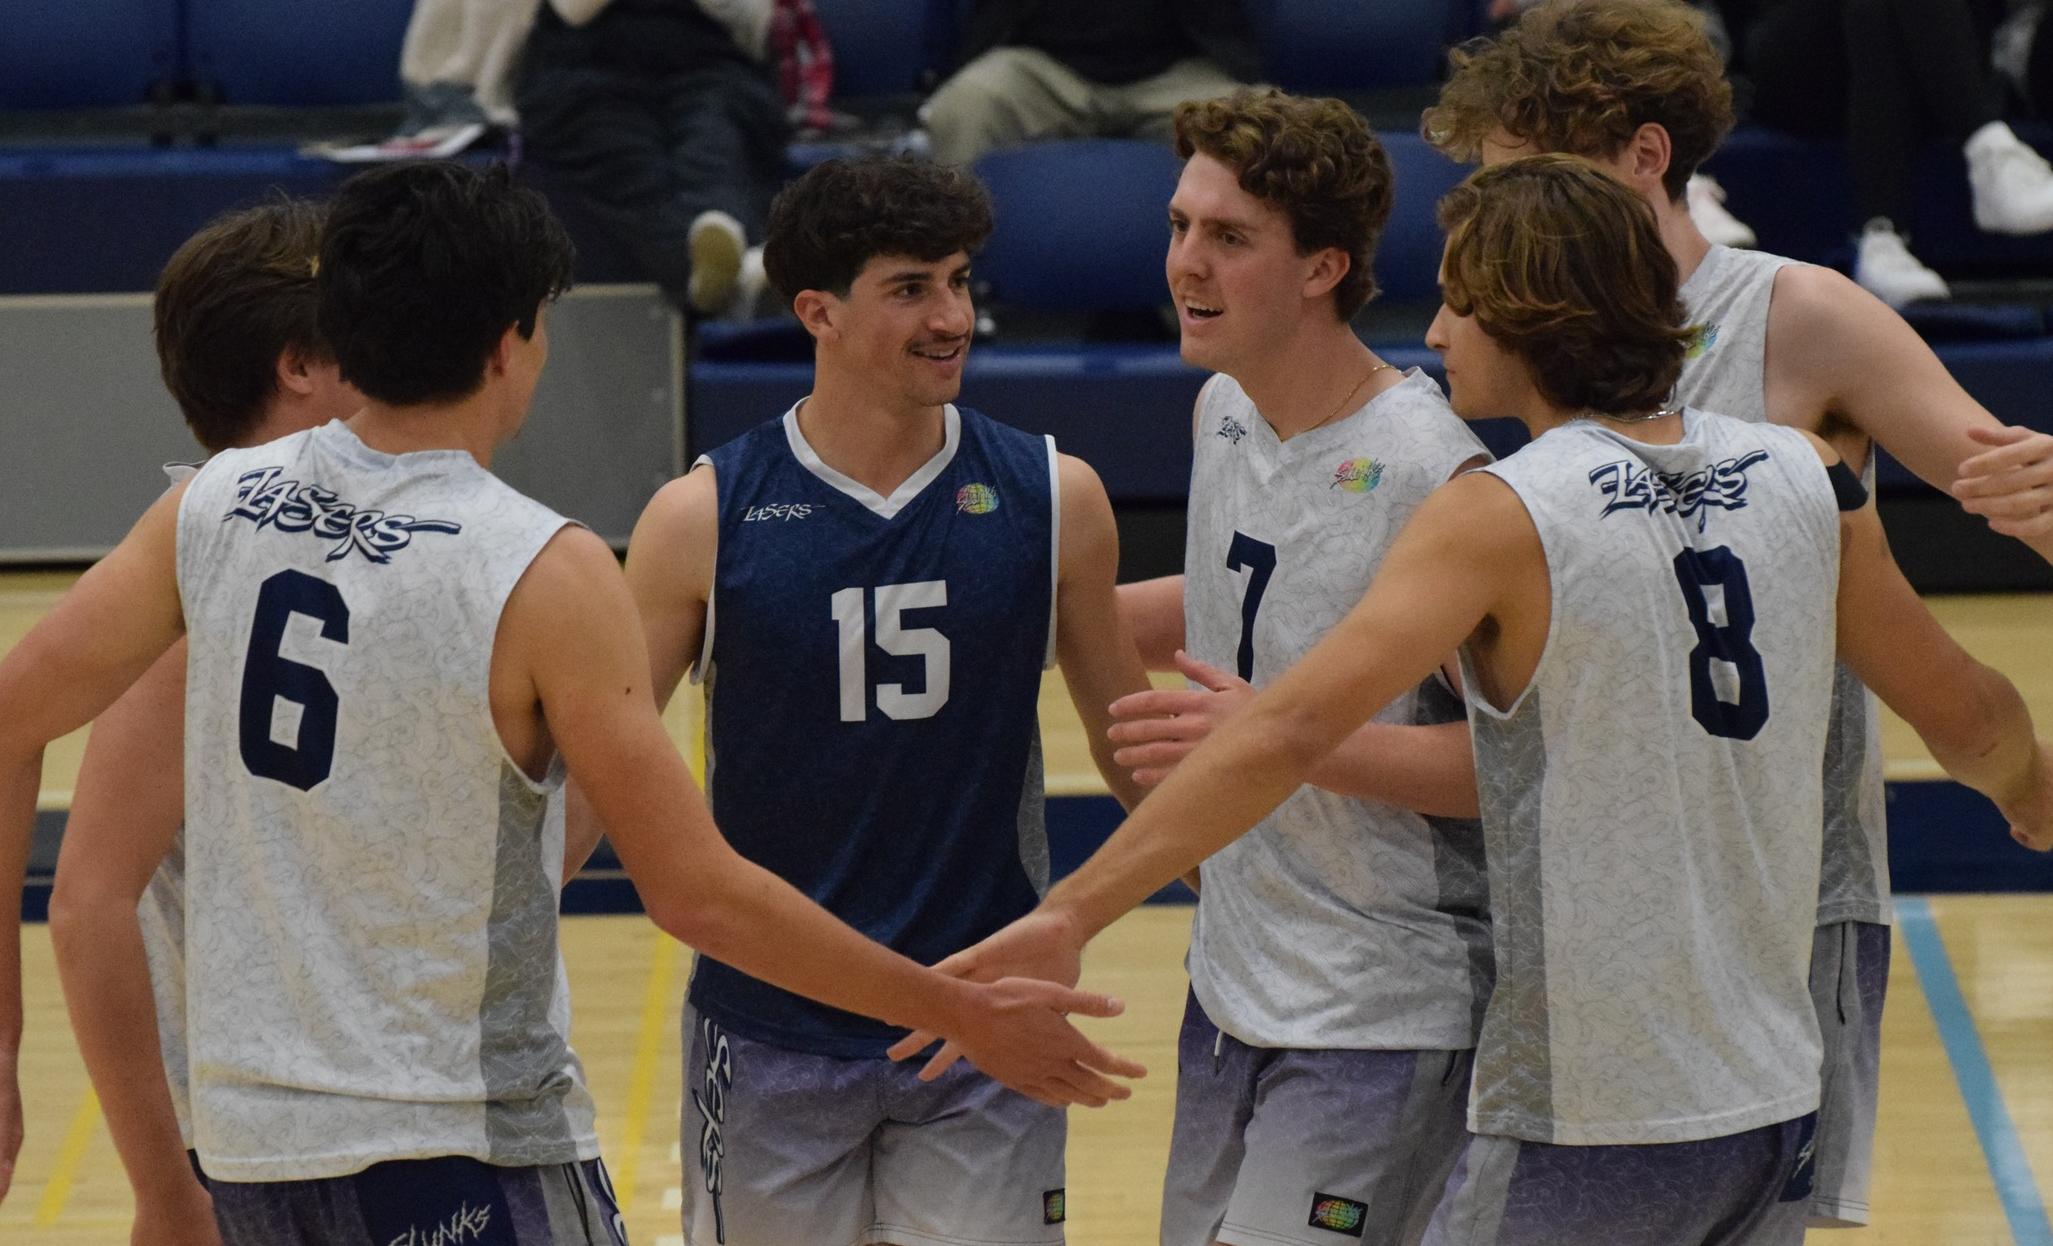 Men's volleyball team sweeps Fullerton for third win in OEC